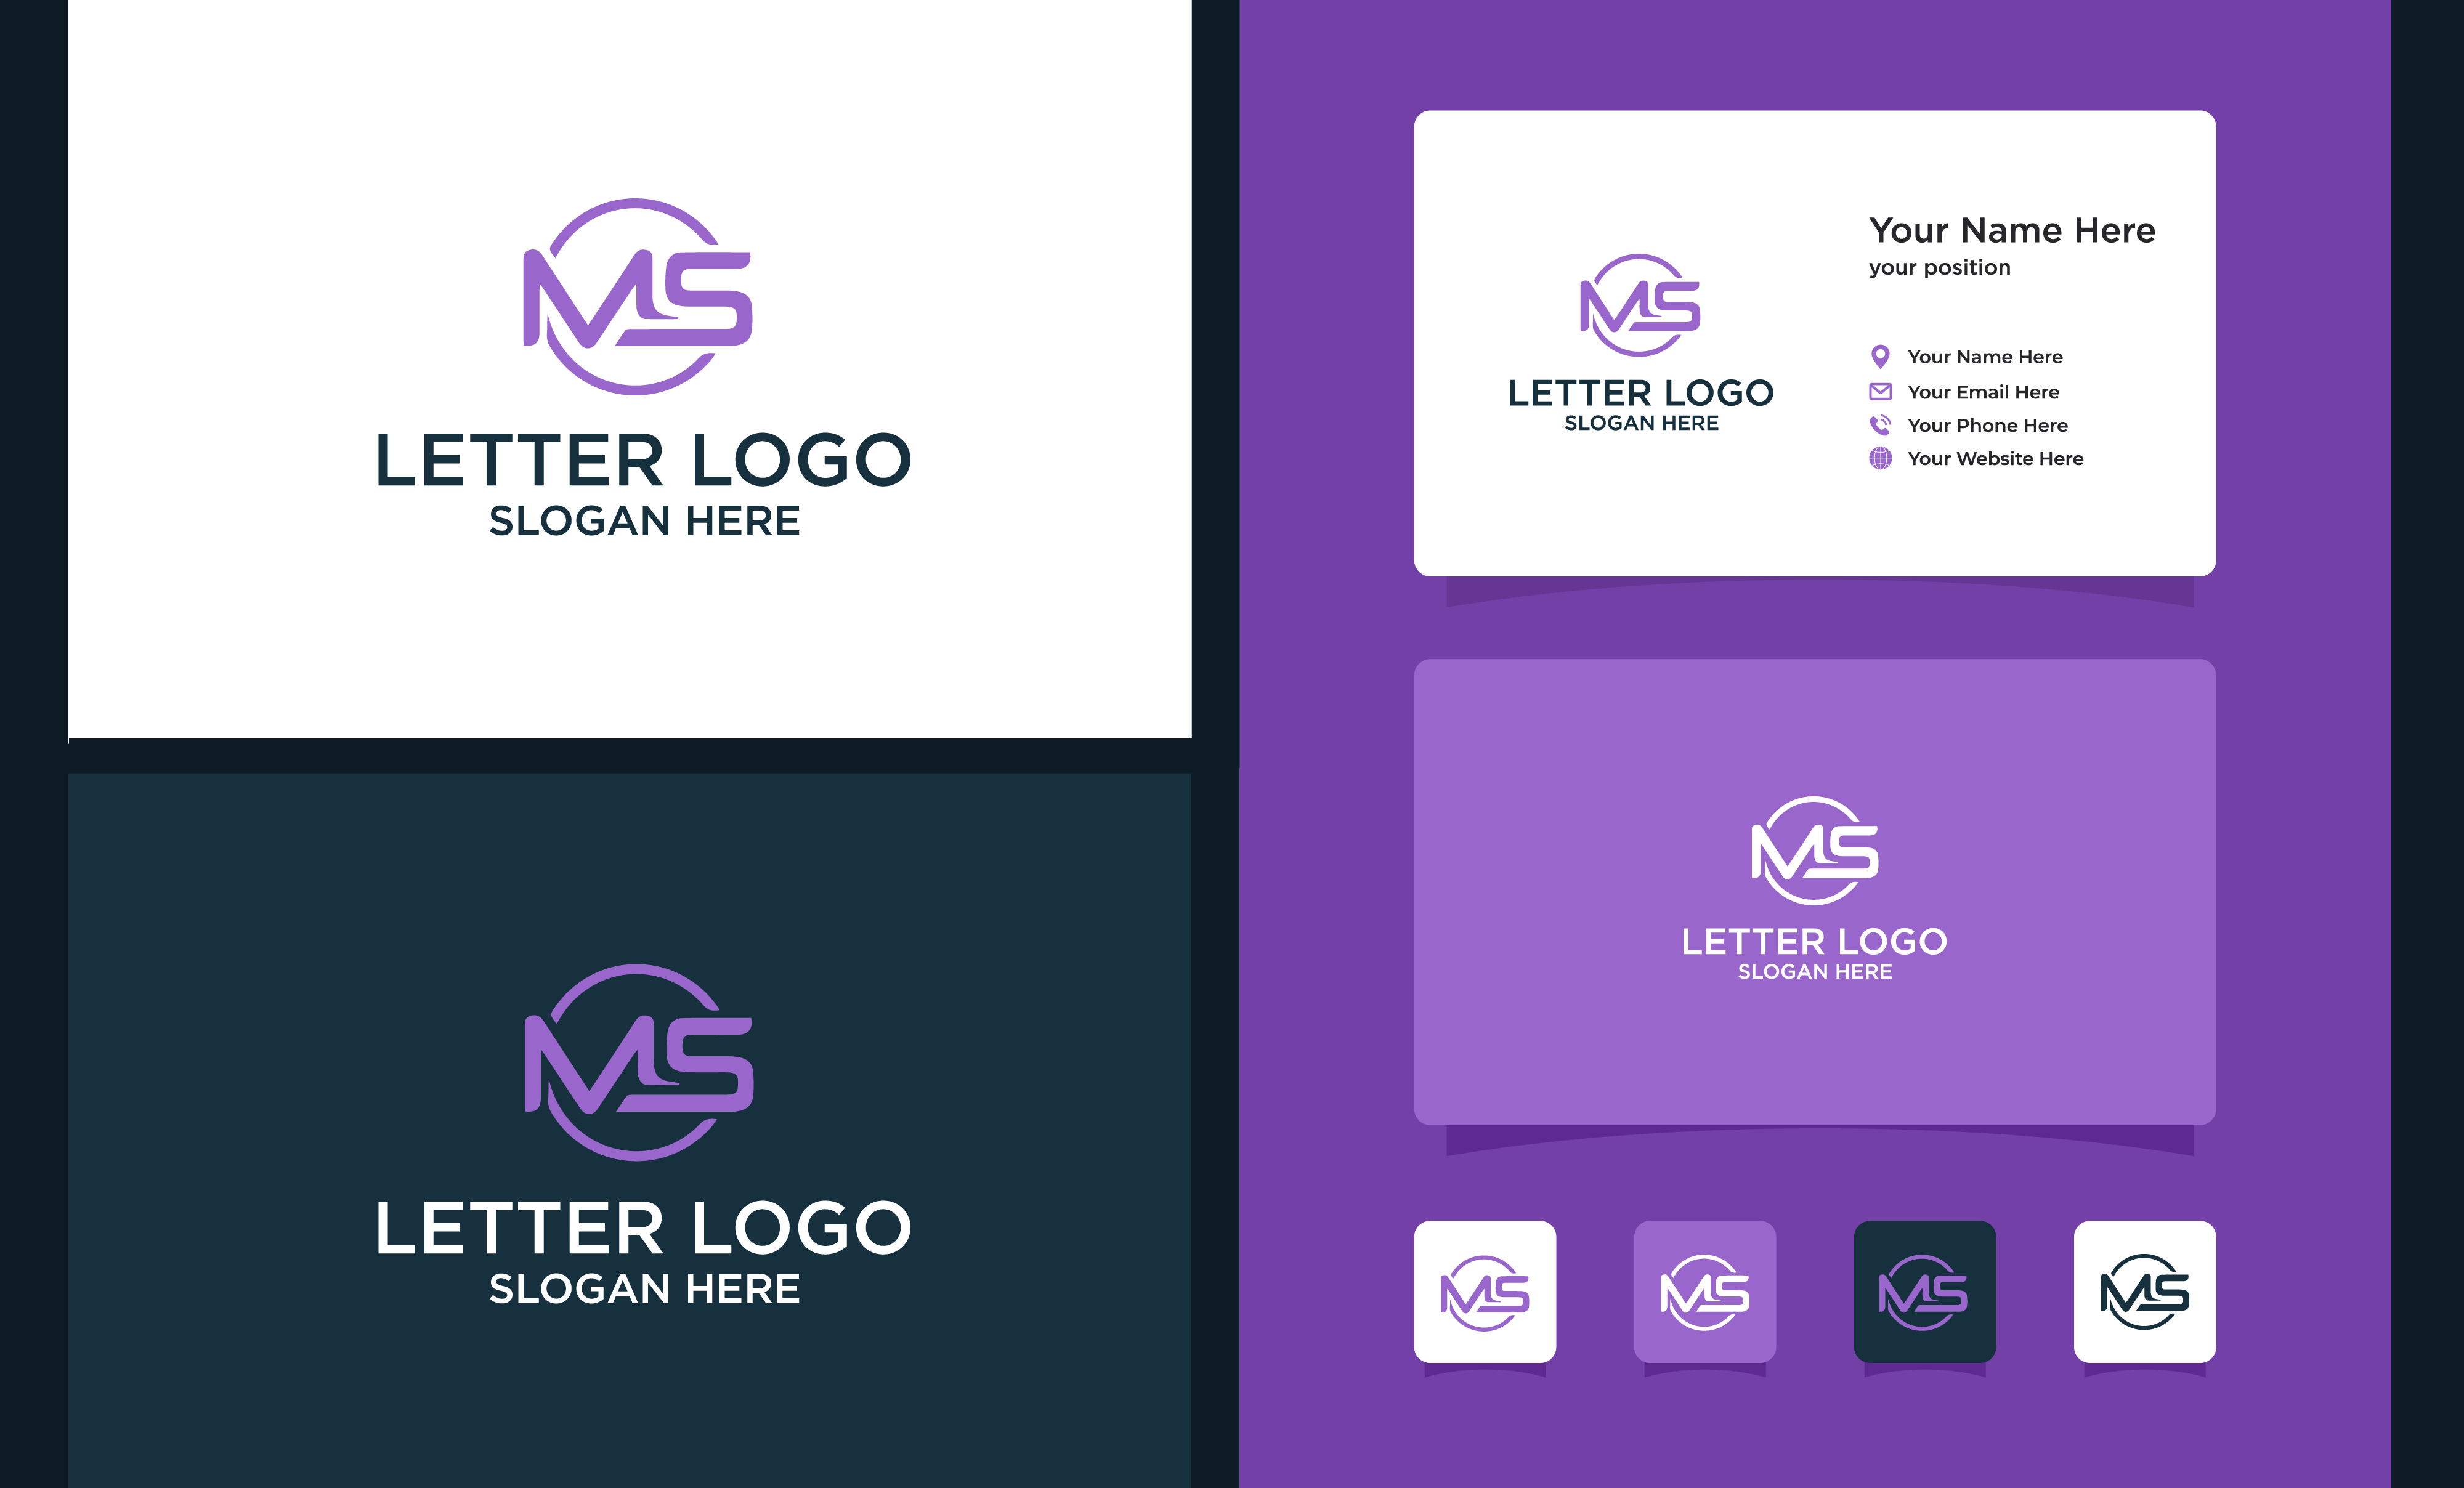 corporate business logo and brand identity with a full branding kit